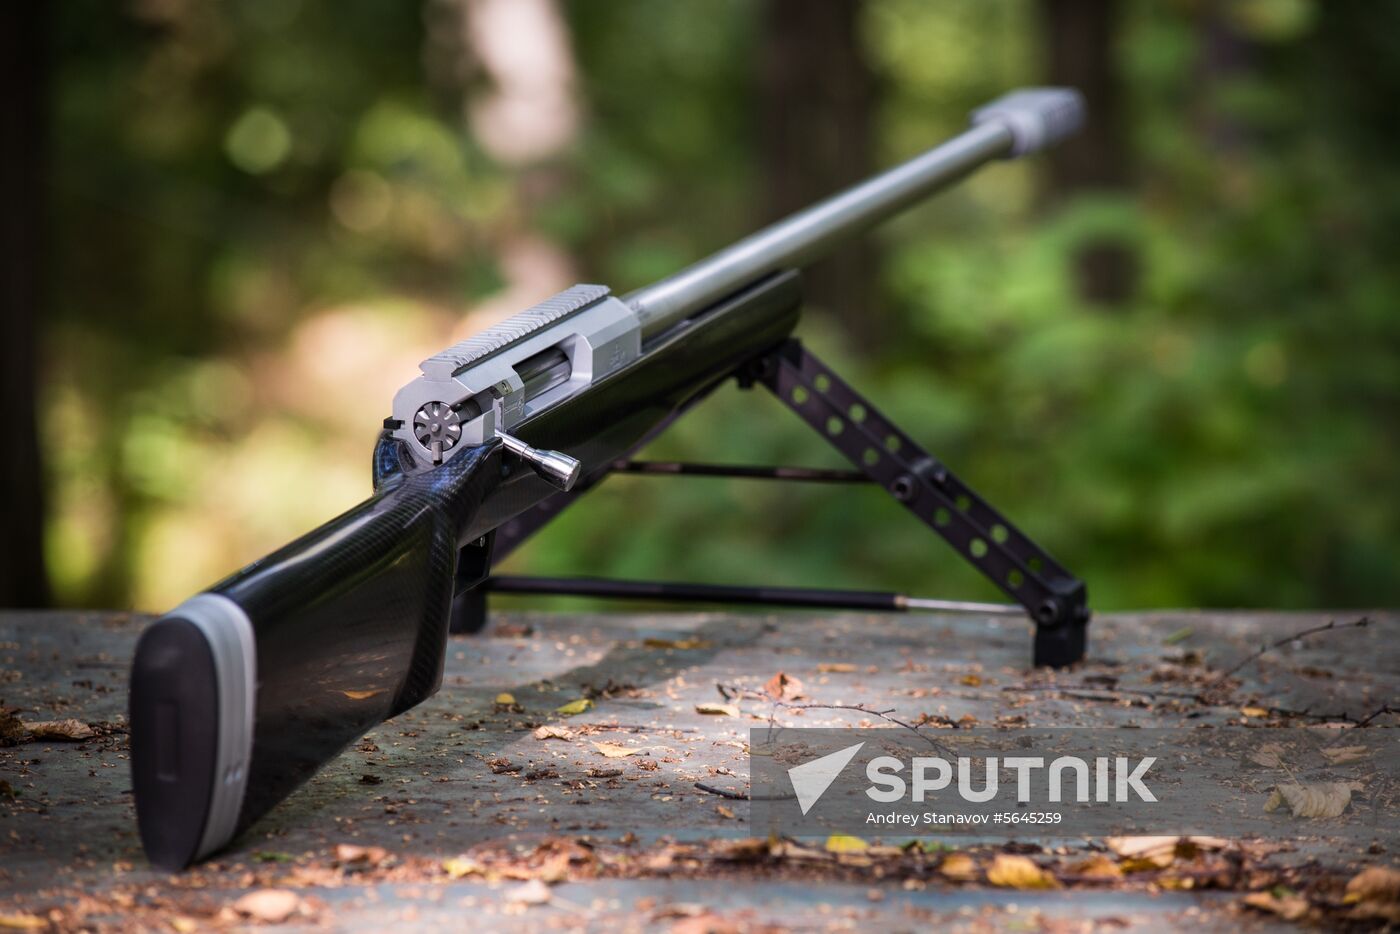 Sniper rifle manufacturing by Lobaev Arms company